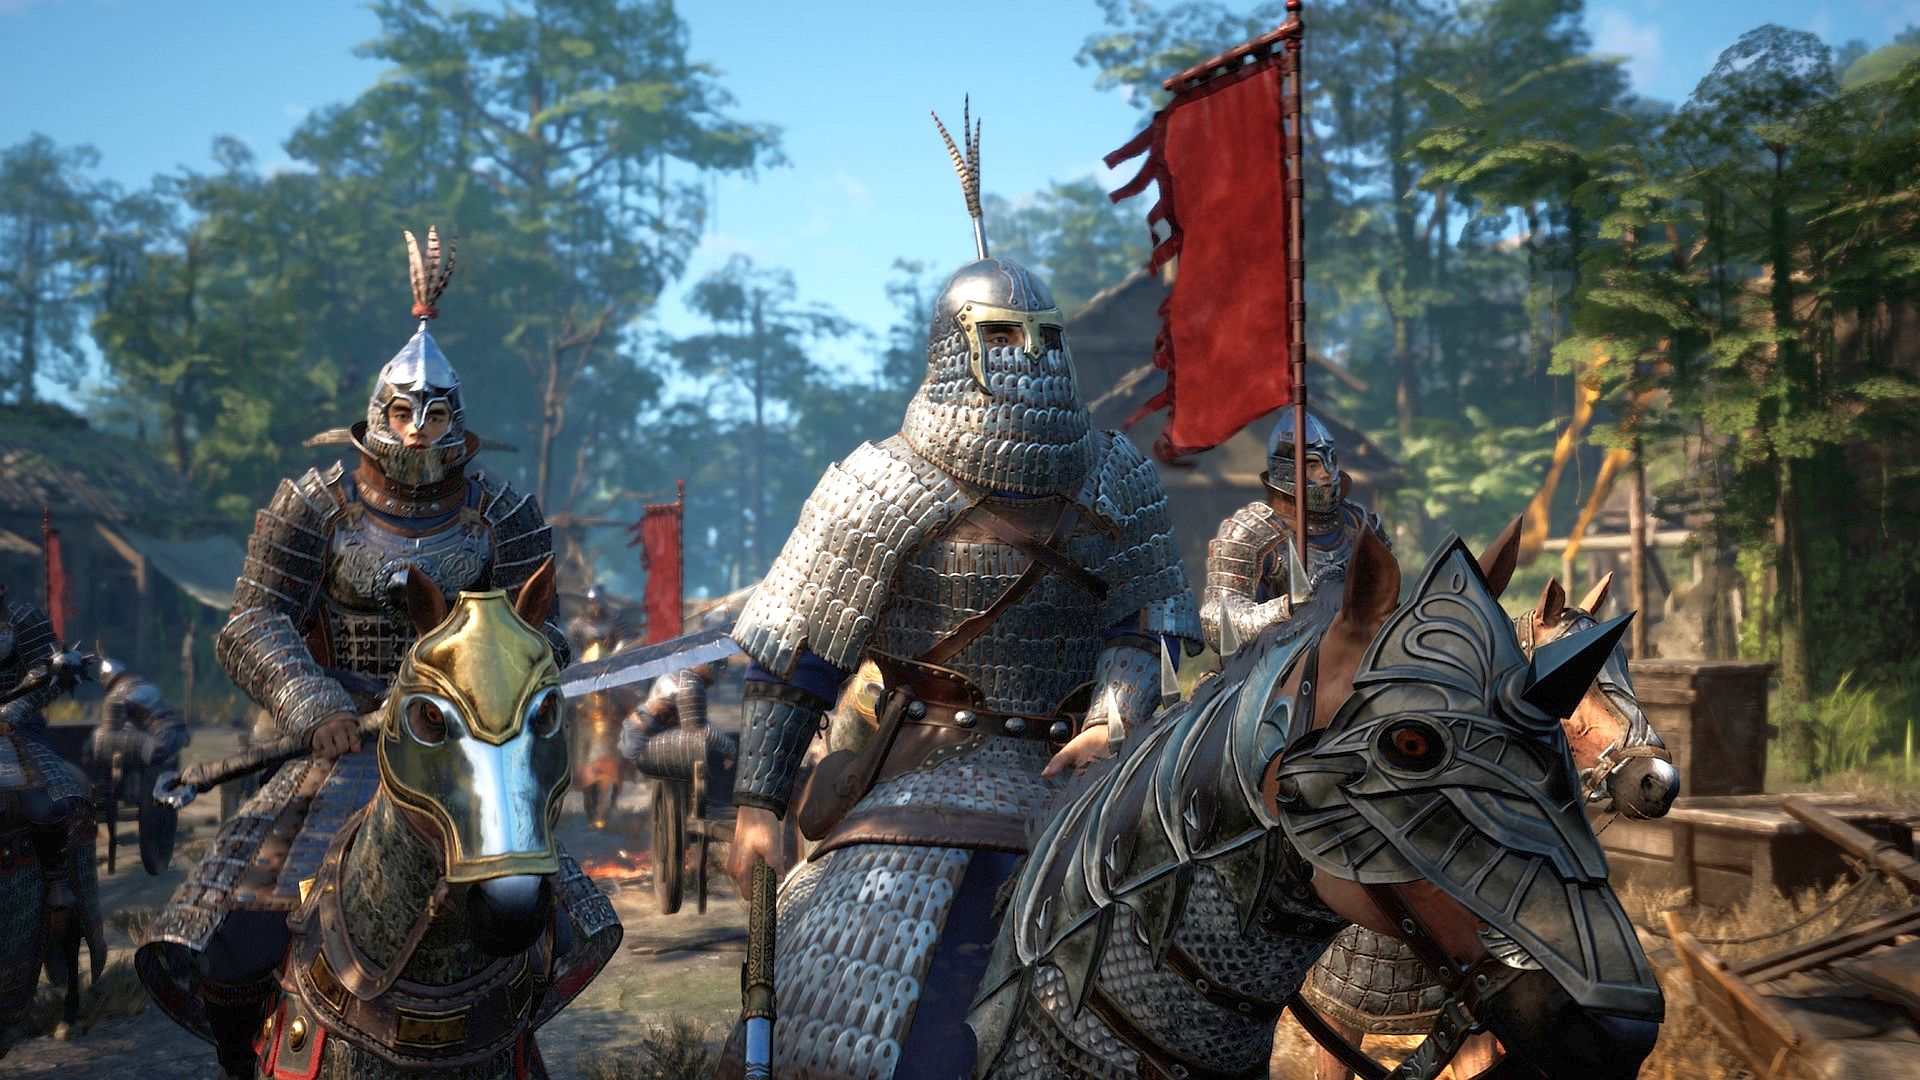 HD wallpaper of armored knights on horseback from the game Myth of Empires, suitable for desktop backgrounds with a medieval theme.